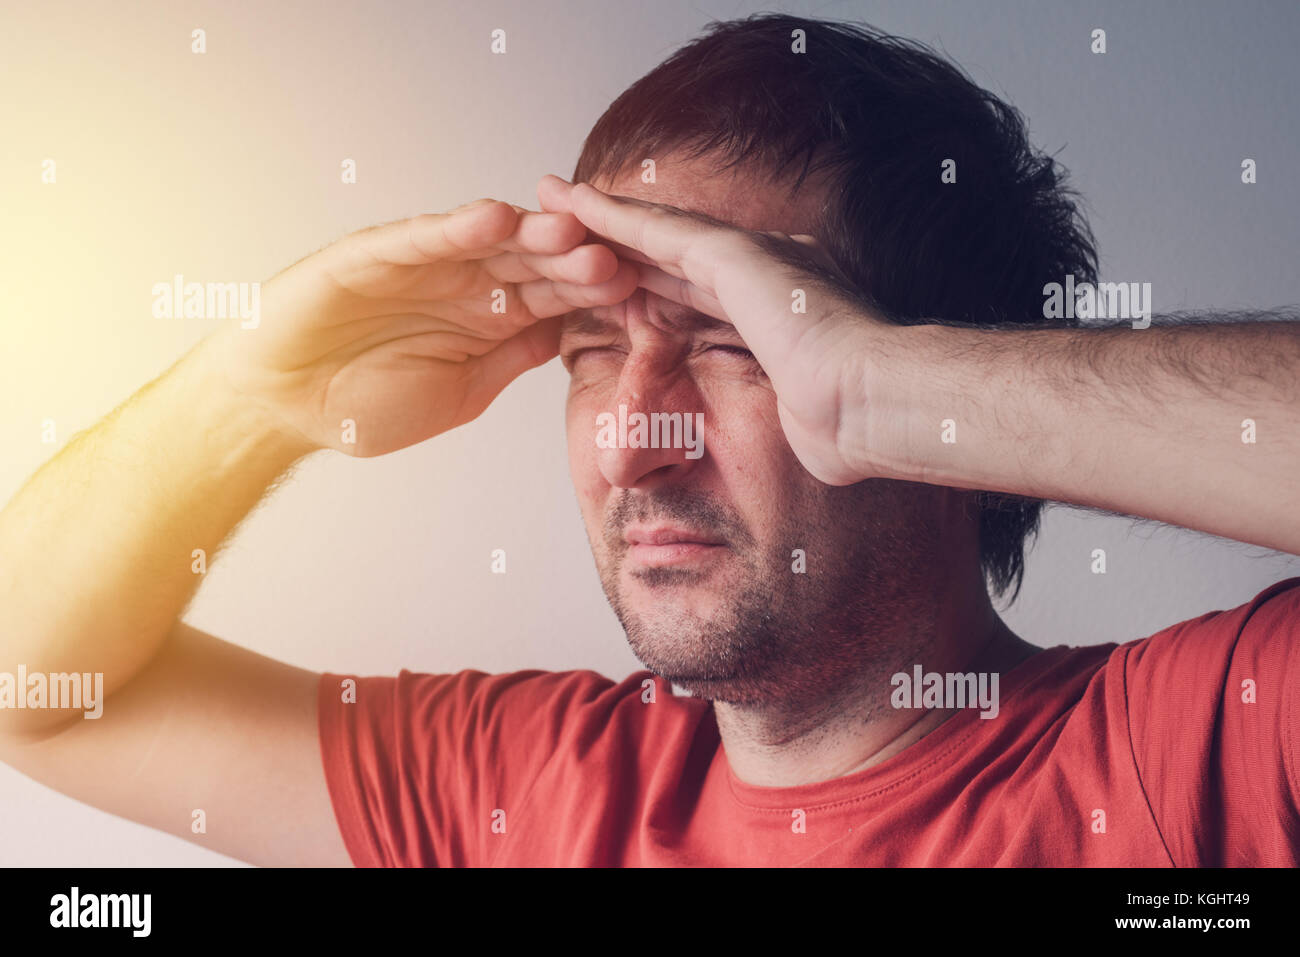 Man looking towards the bright light source. Optimistic concept of new chance, hope and solutions of problems. Stock Photo